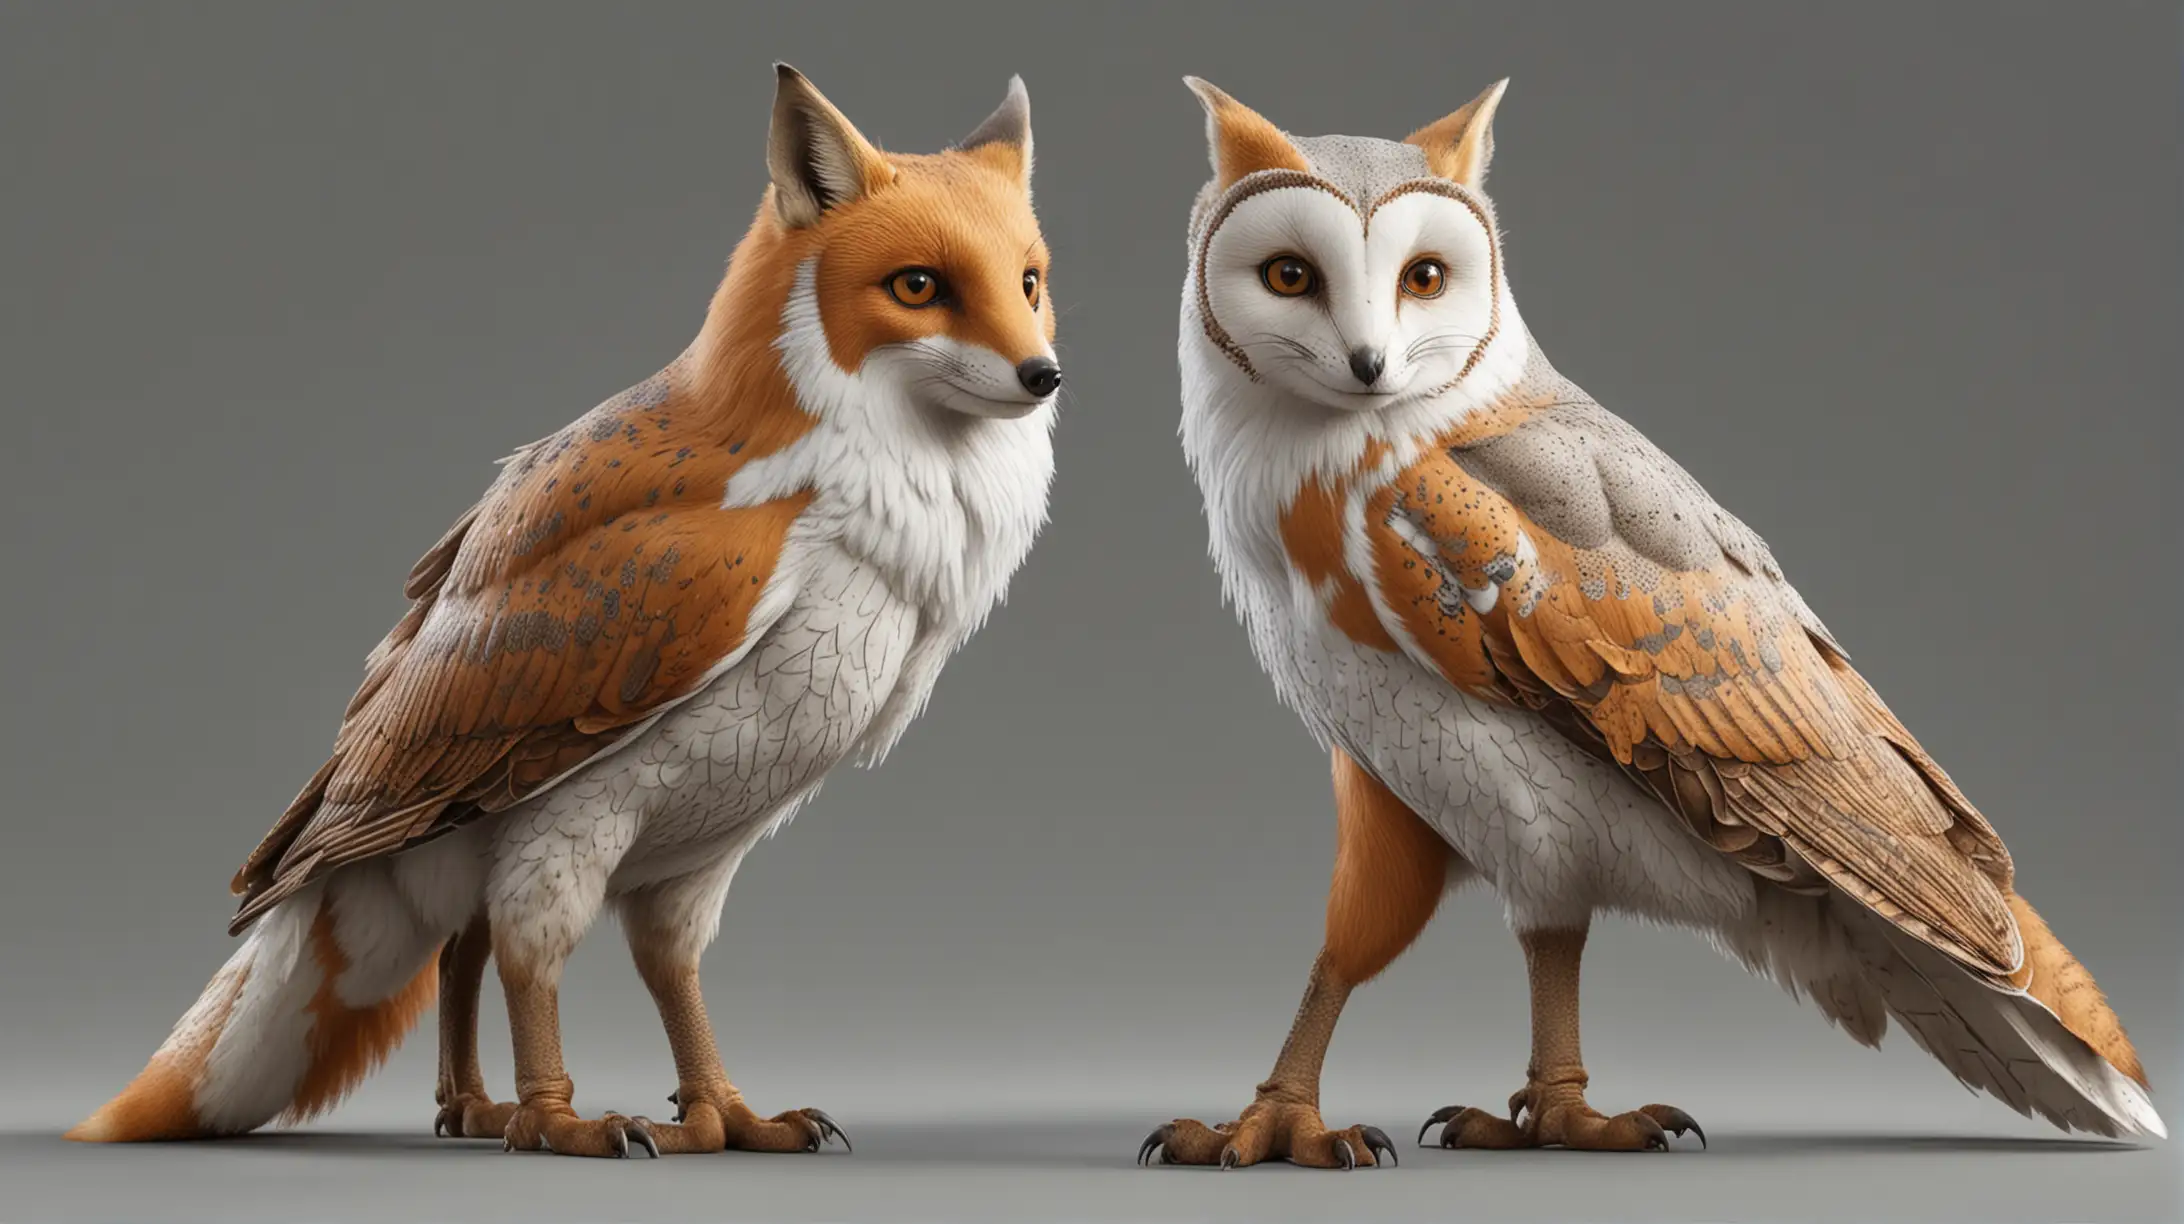 HyperRealistic Fox with Barn Owl Features on Neutral Gray Background